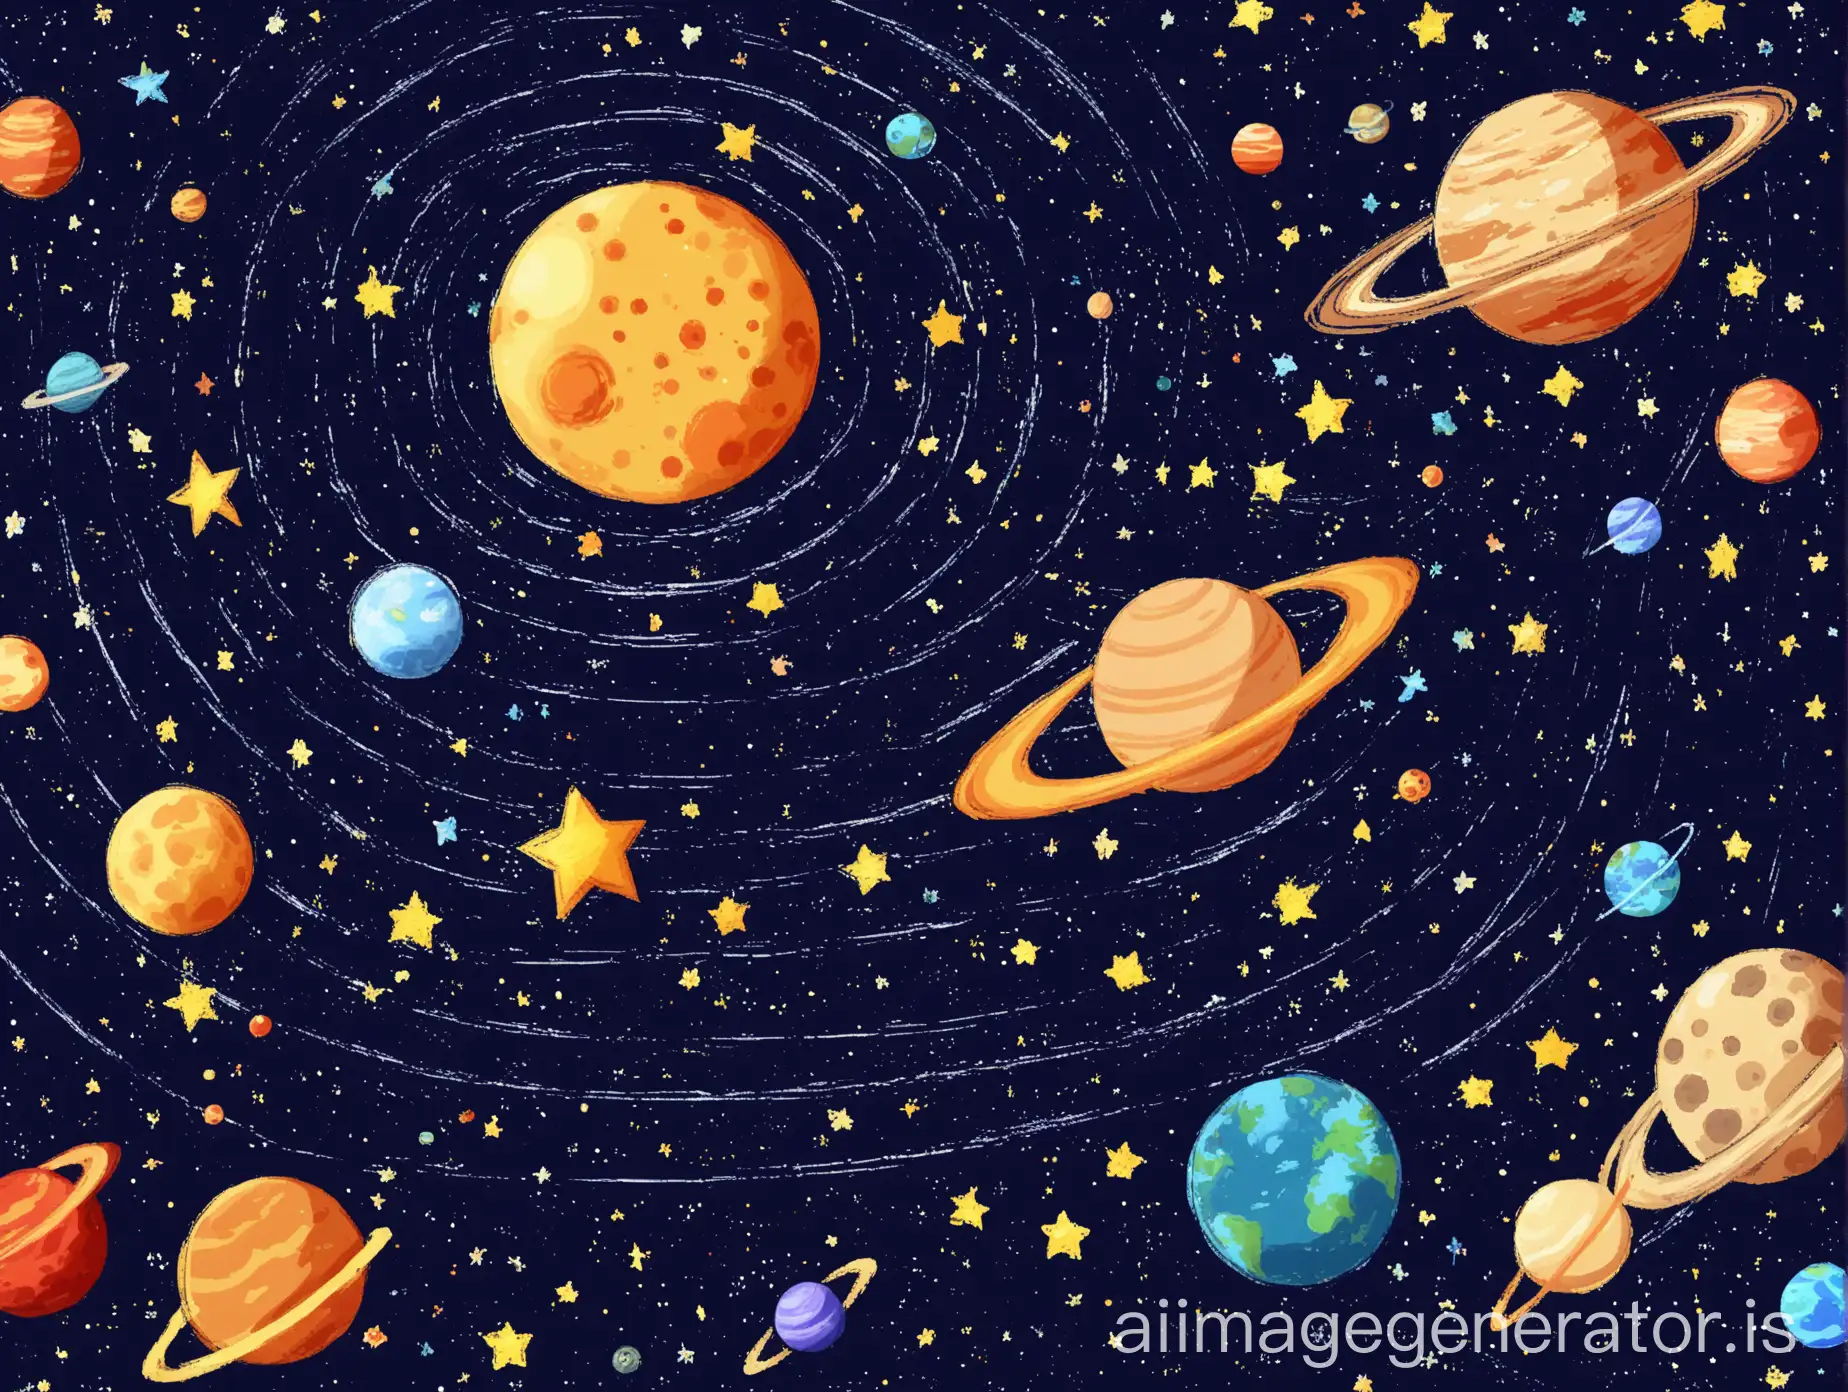 Playful-Space-Adventure-with-Stars-and-Planets